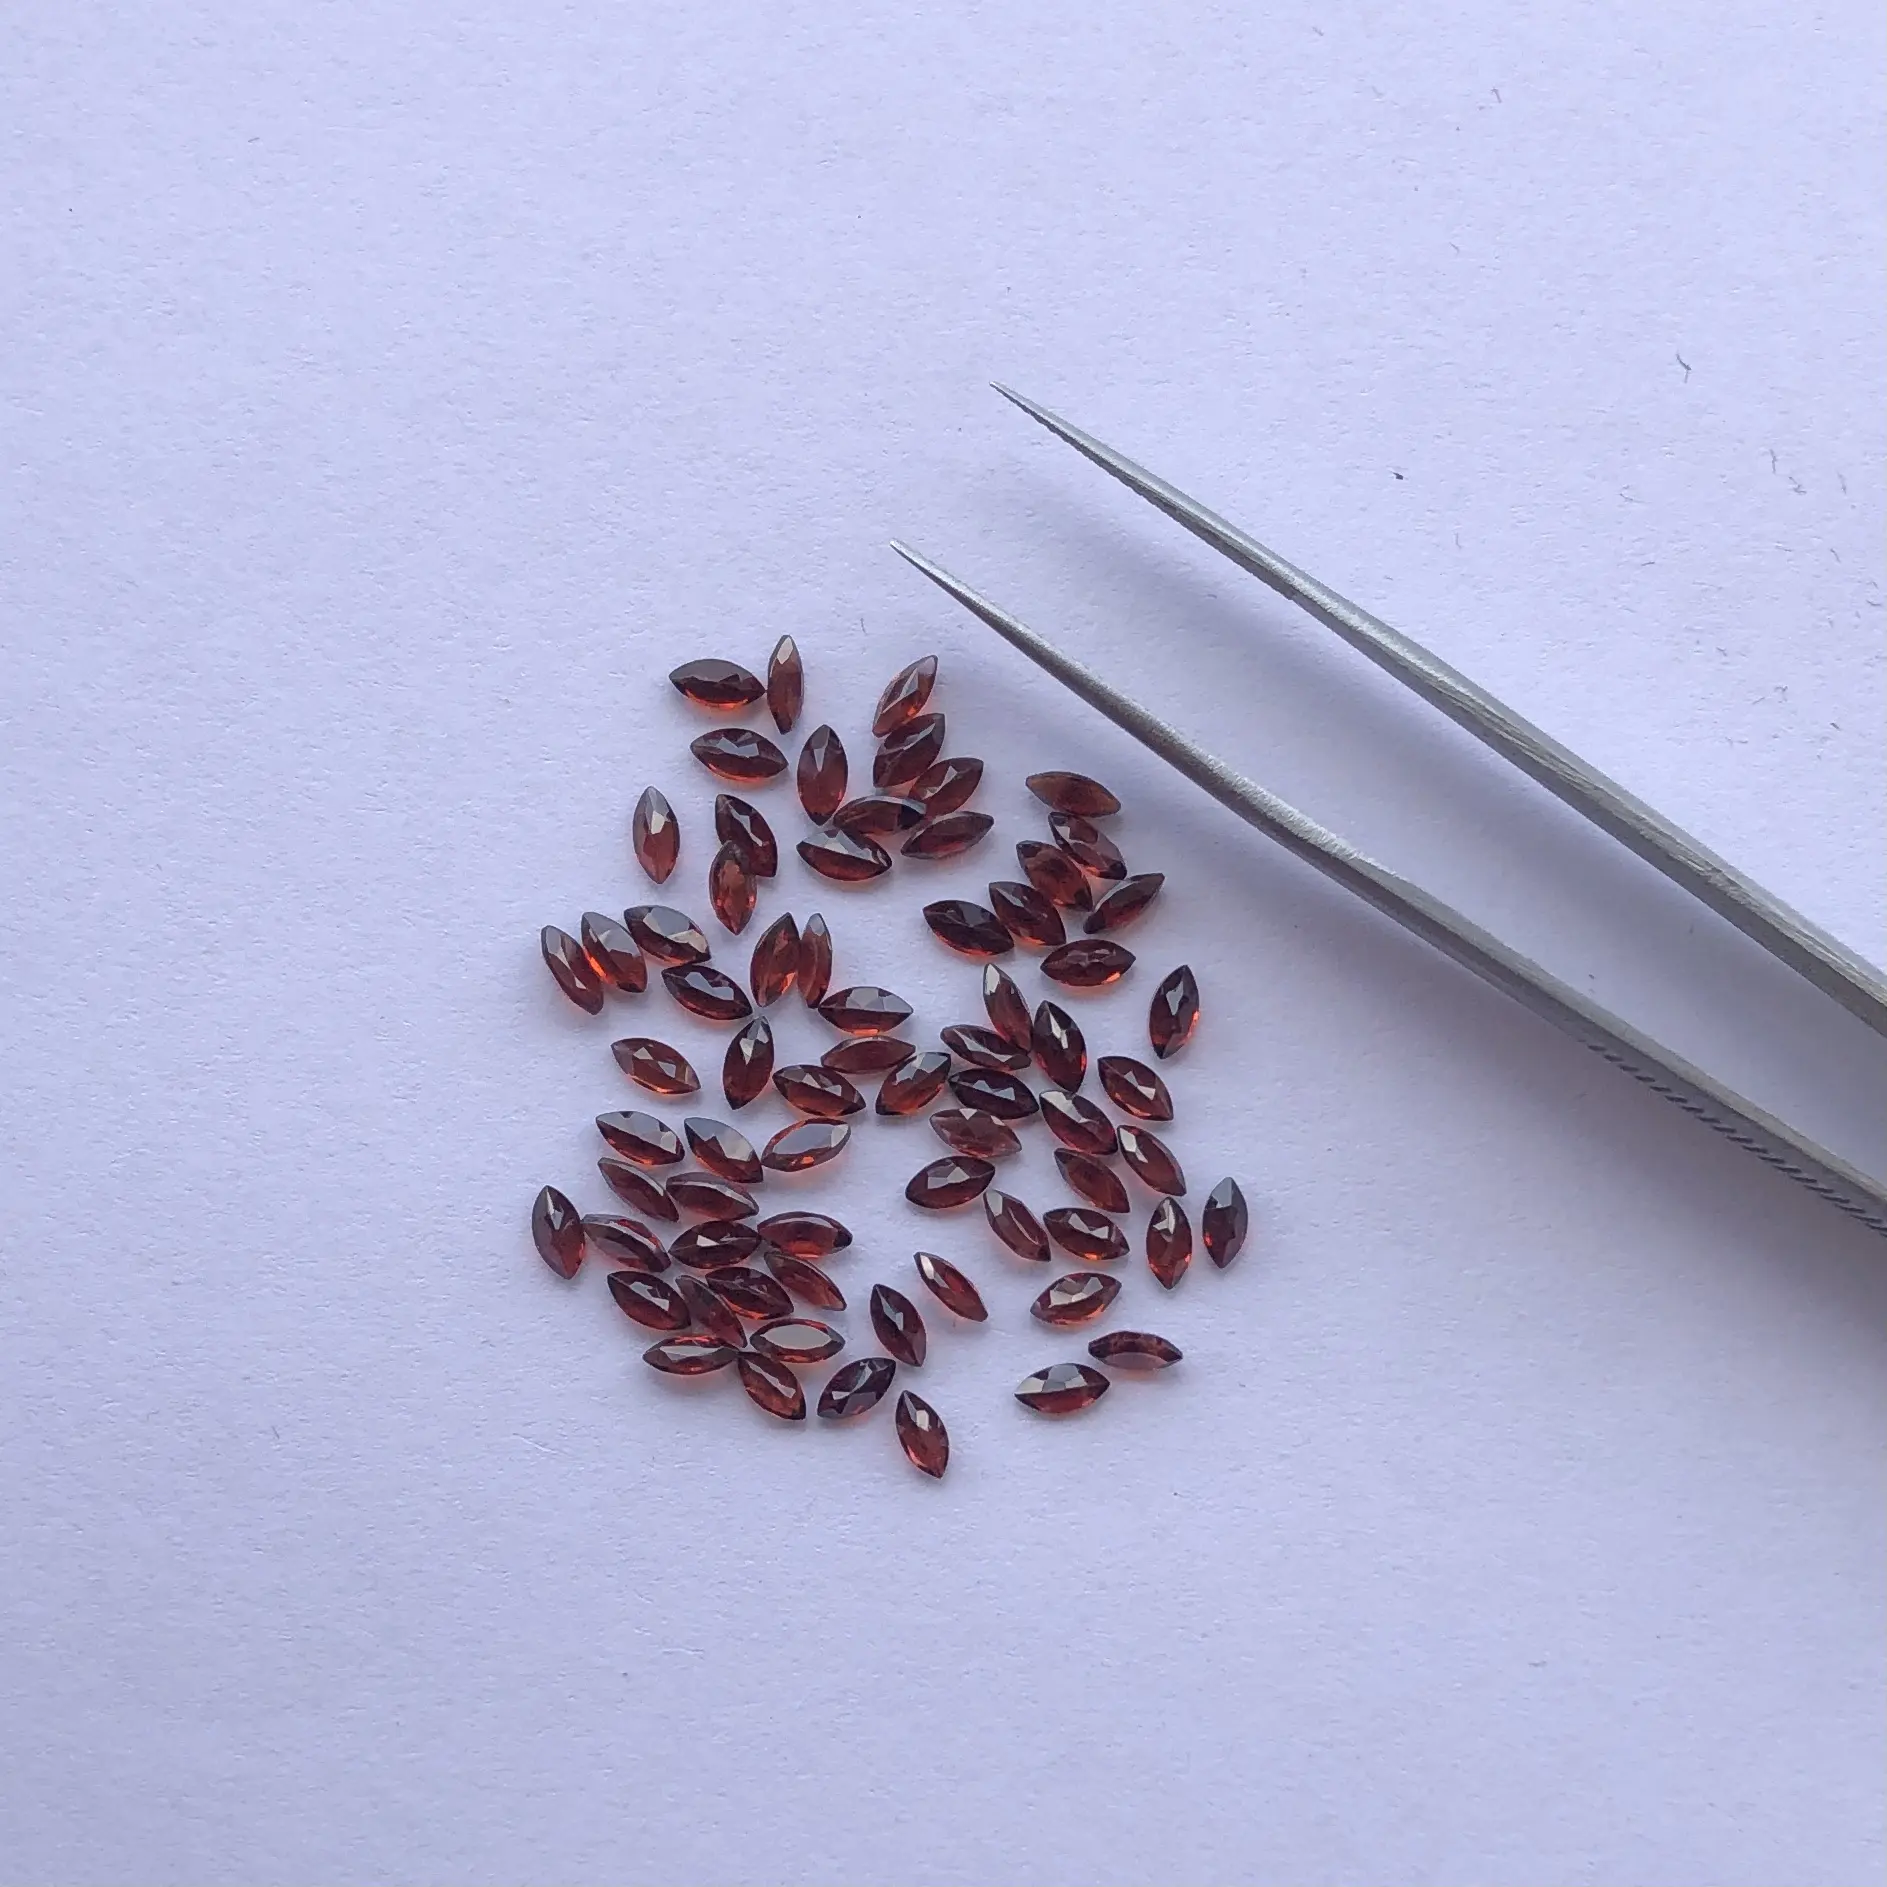 2x4mm Natural Red Garnet Faceted Marquise Cut Semi Precious Gemstones Wholesale Price Loose Stones for Jewelry Making Online Buy